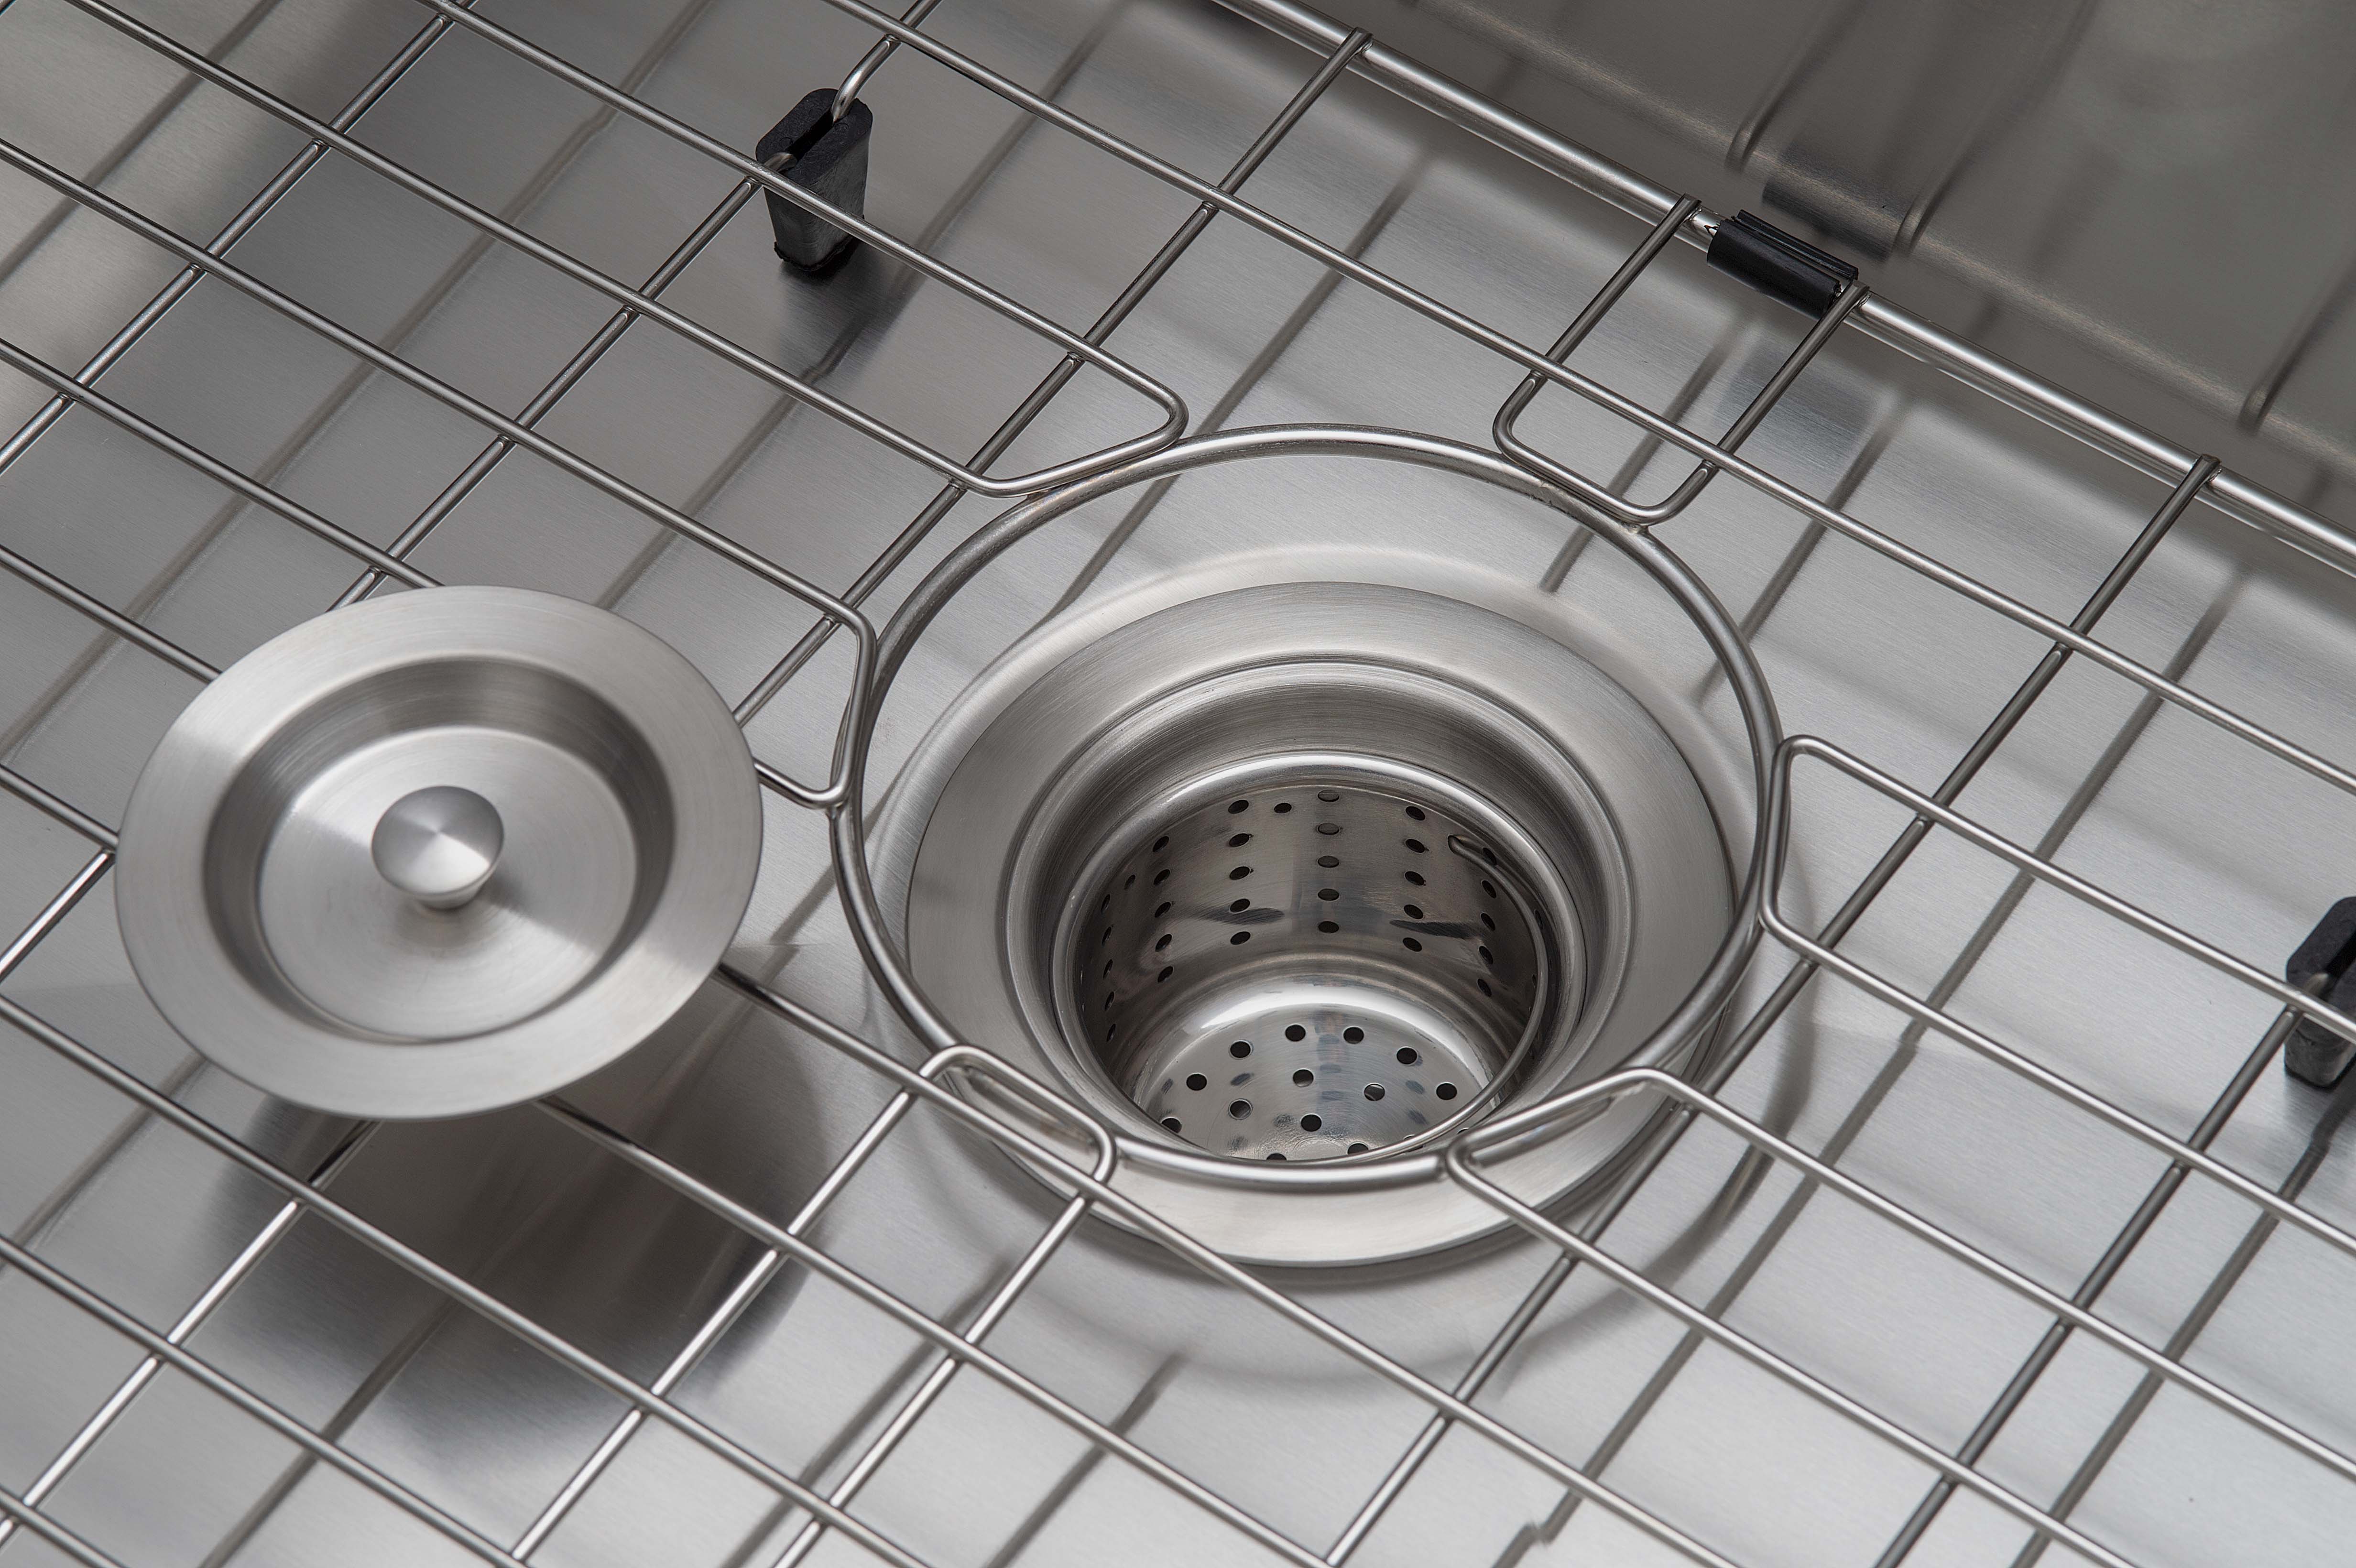 Prestige Series Undermount Stainless Steel 30 in. Single Bowl Kitchen Sink with Grid and Strainer in Satin 